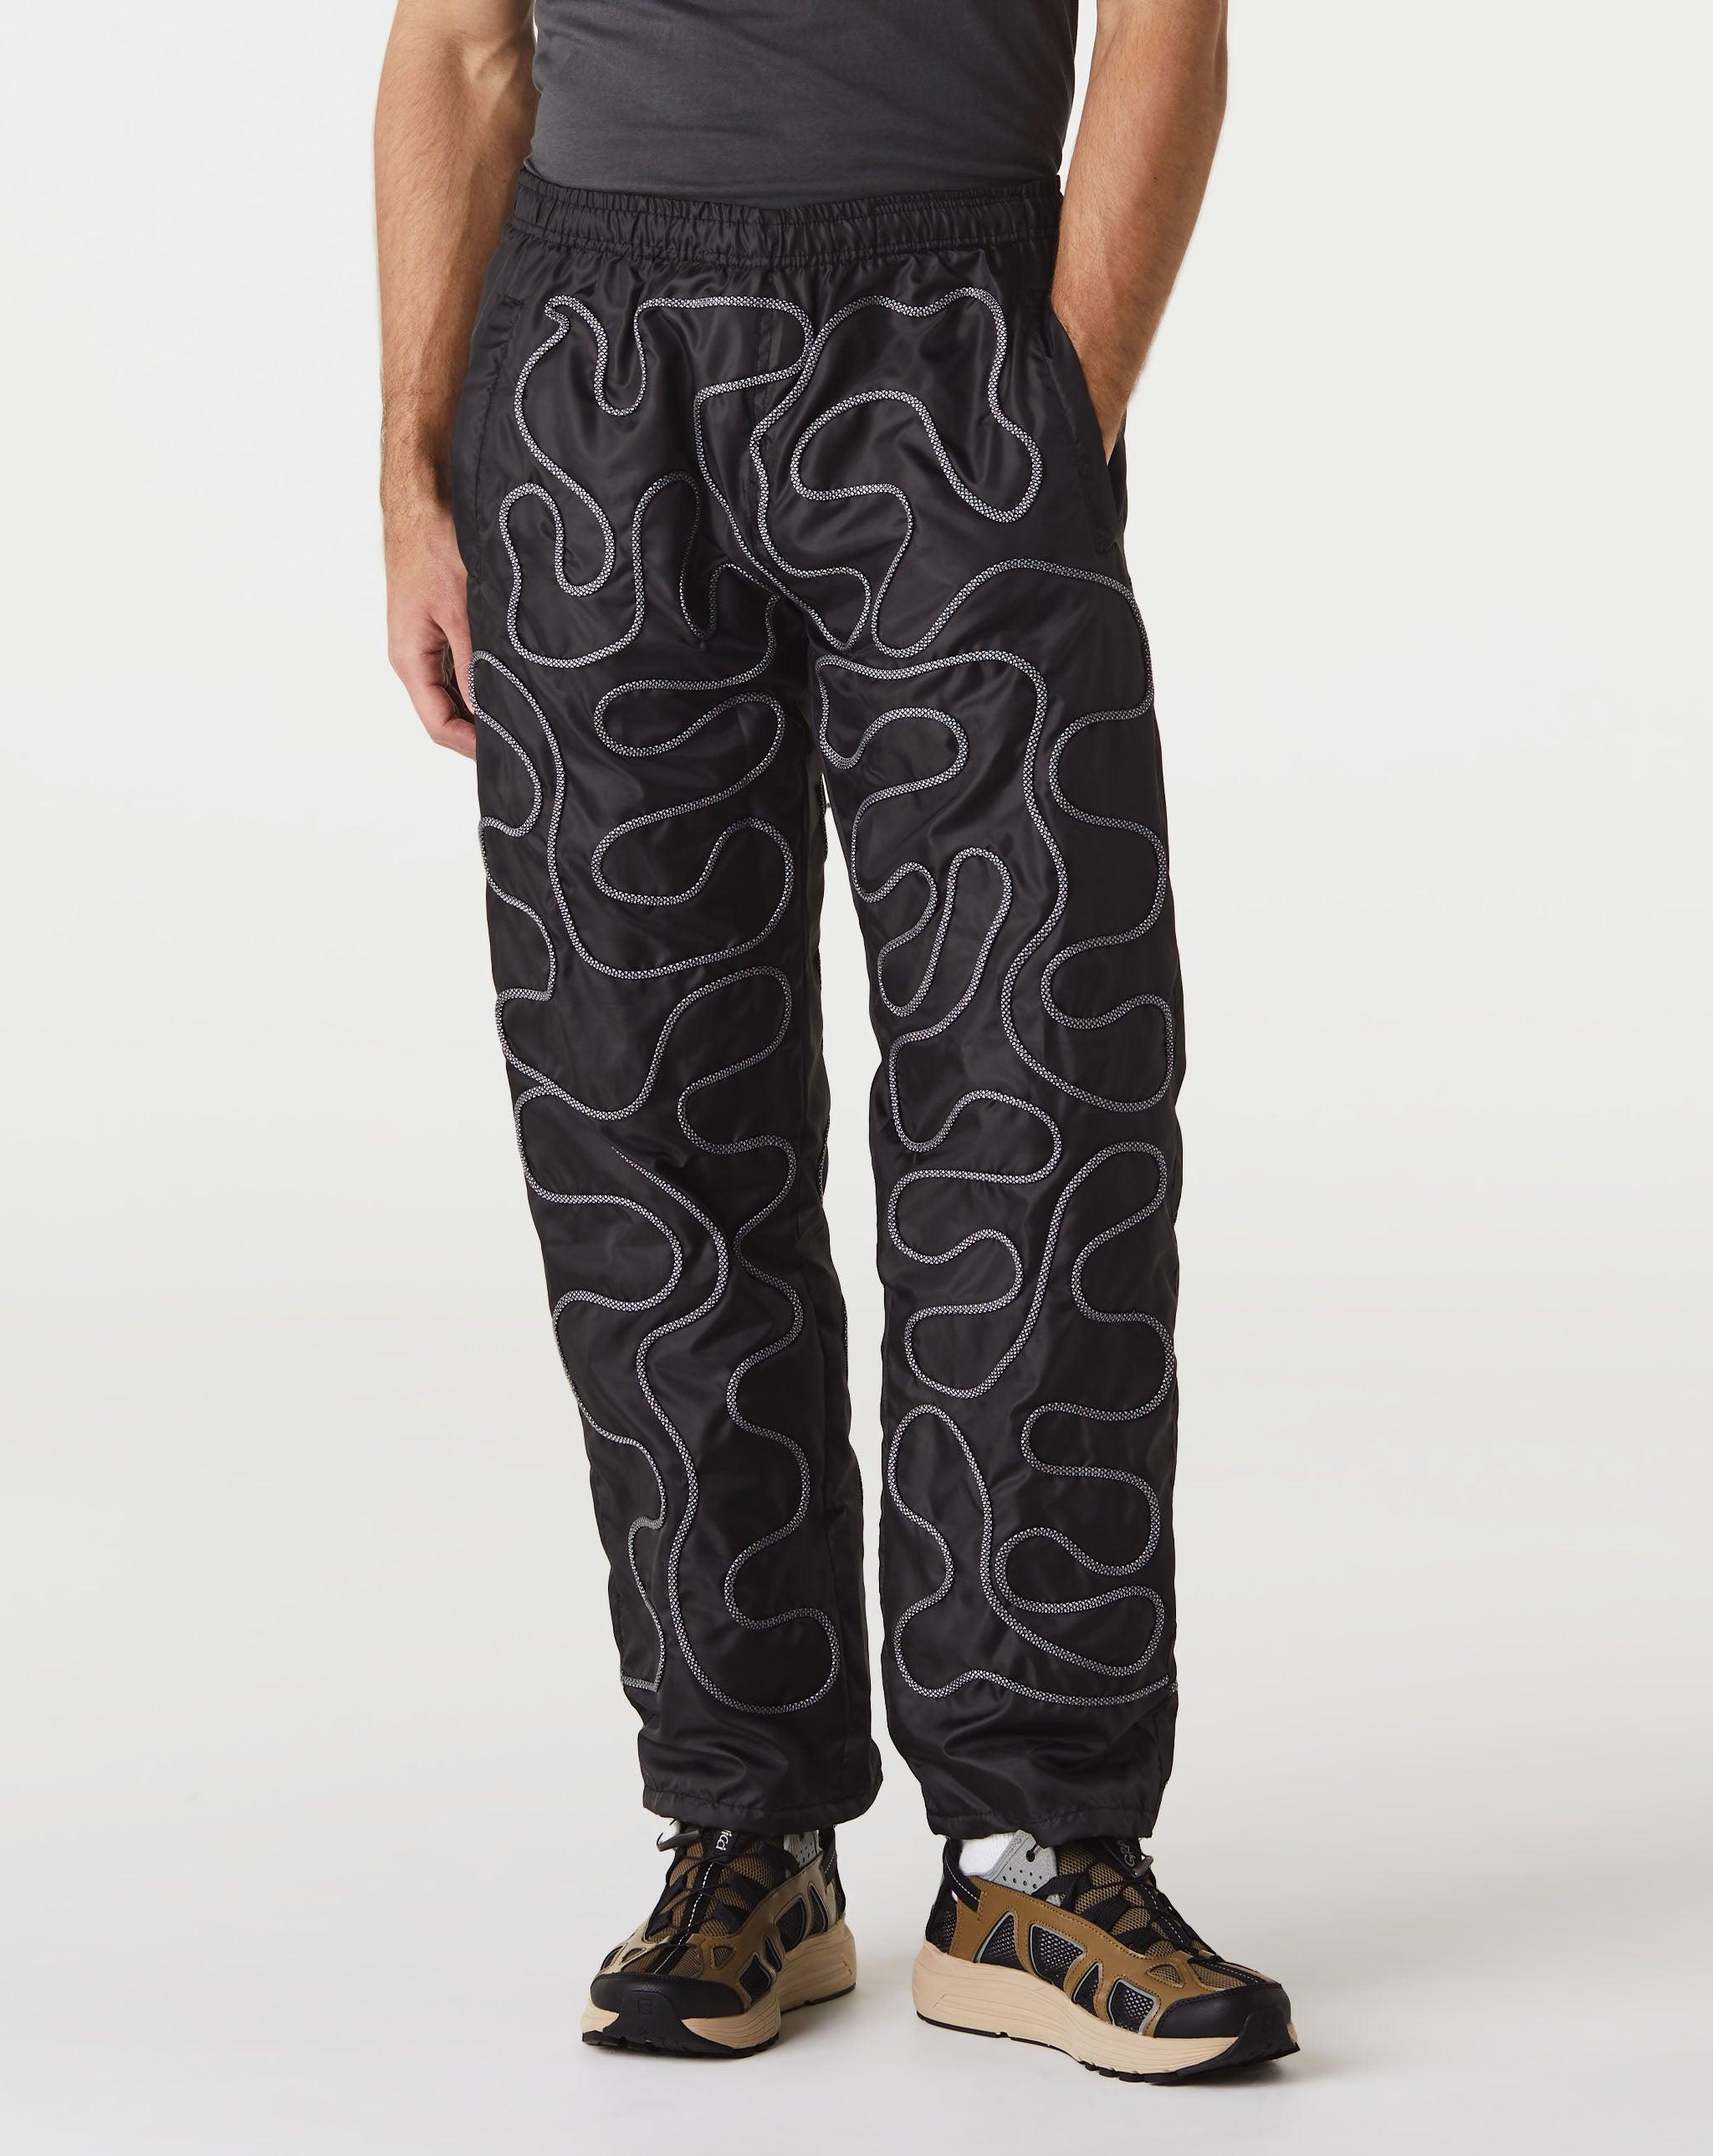 caption mass Radiate Market Reflective Rope Pants in Black for Men | Lyst